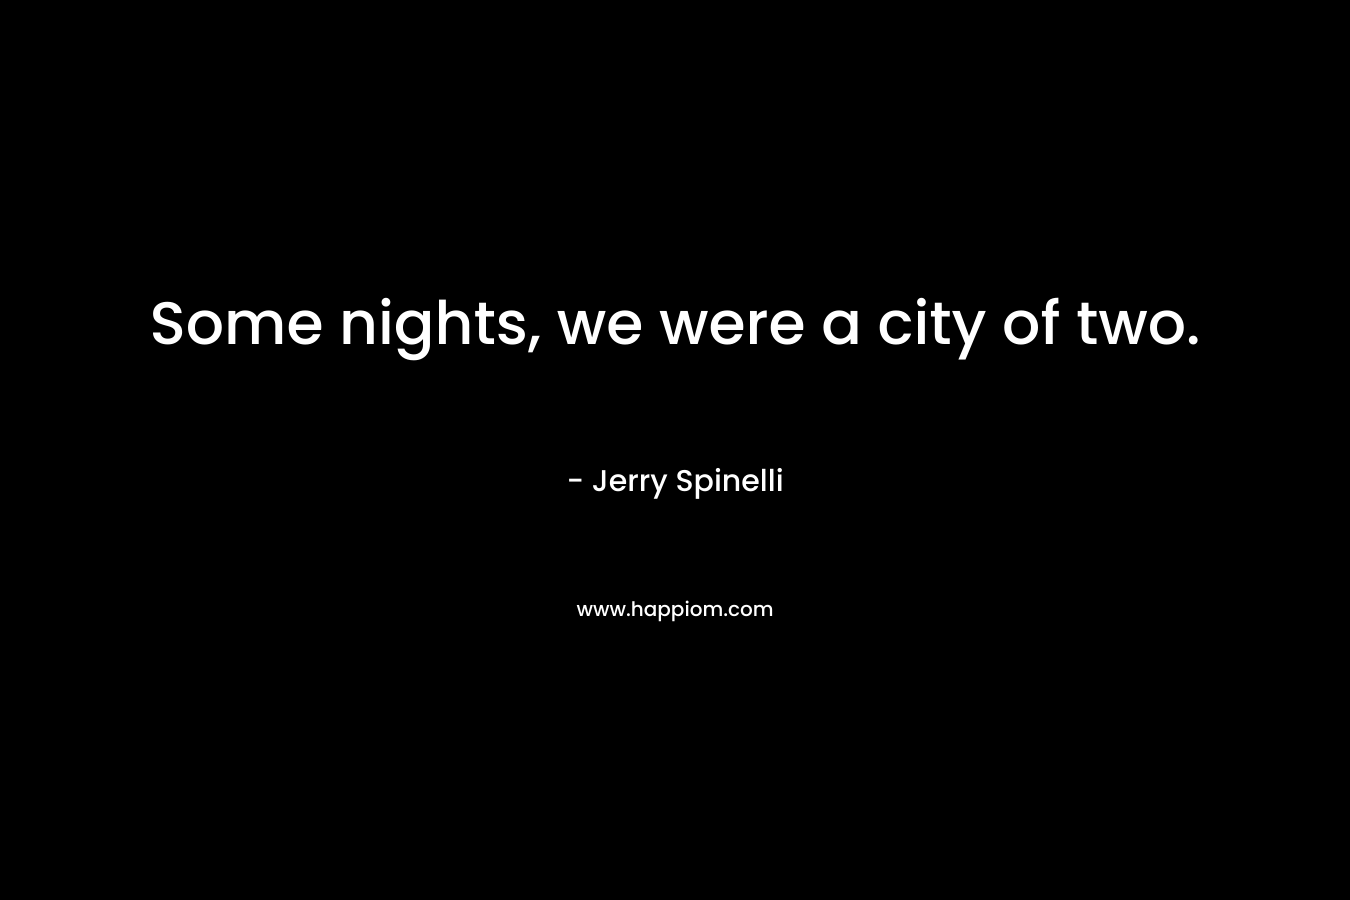 Some nights, we were a city of two.